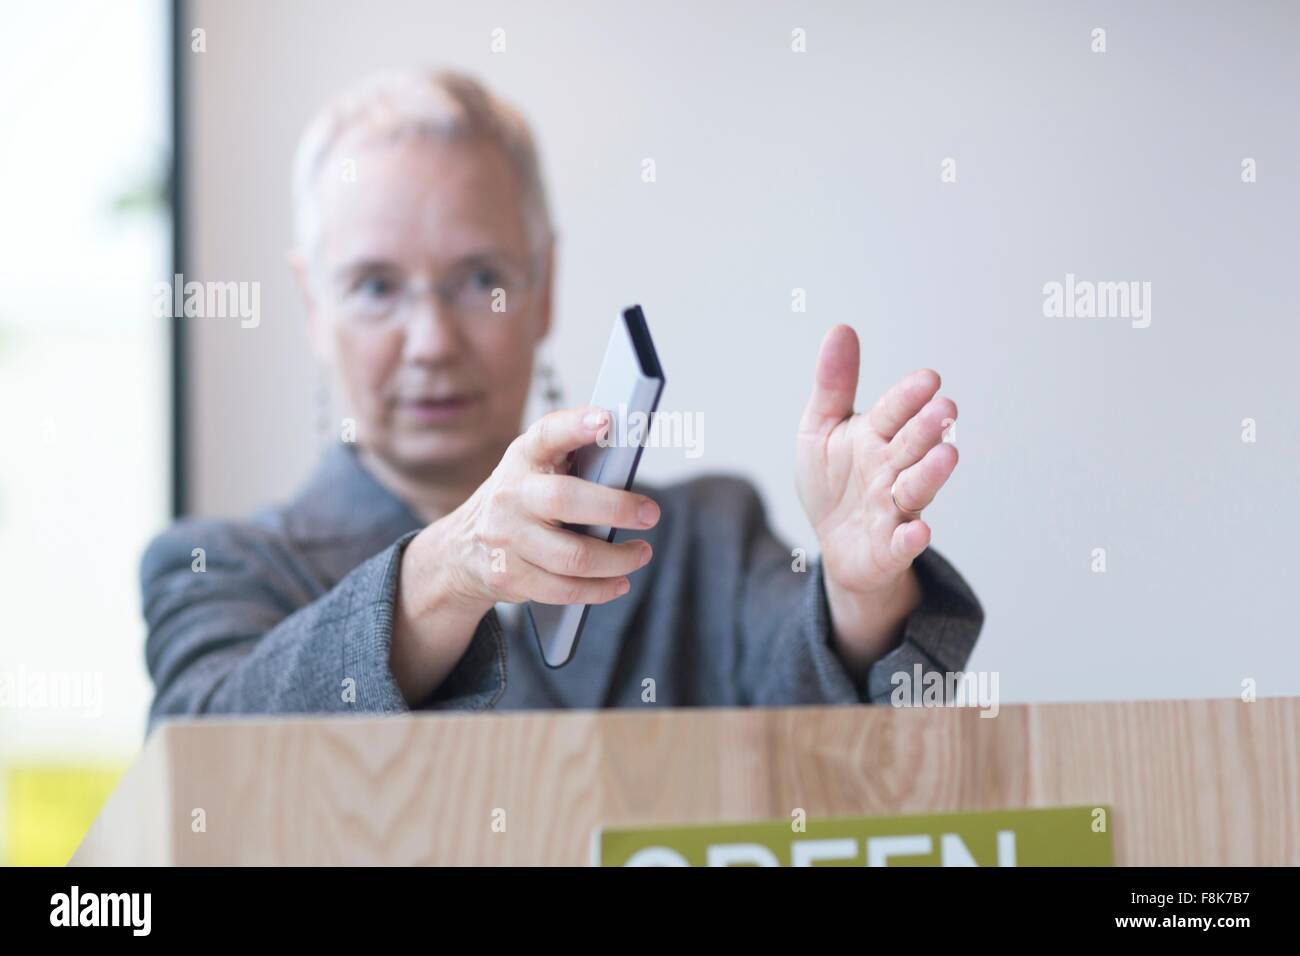 Mature woman behind podium giving lecture holding remote control, gesticulating Stock Photo